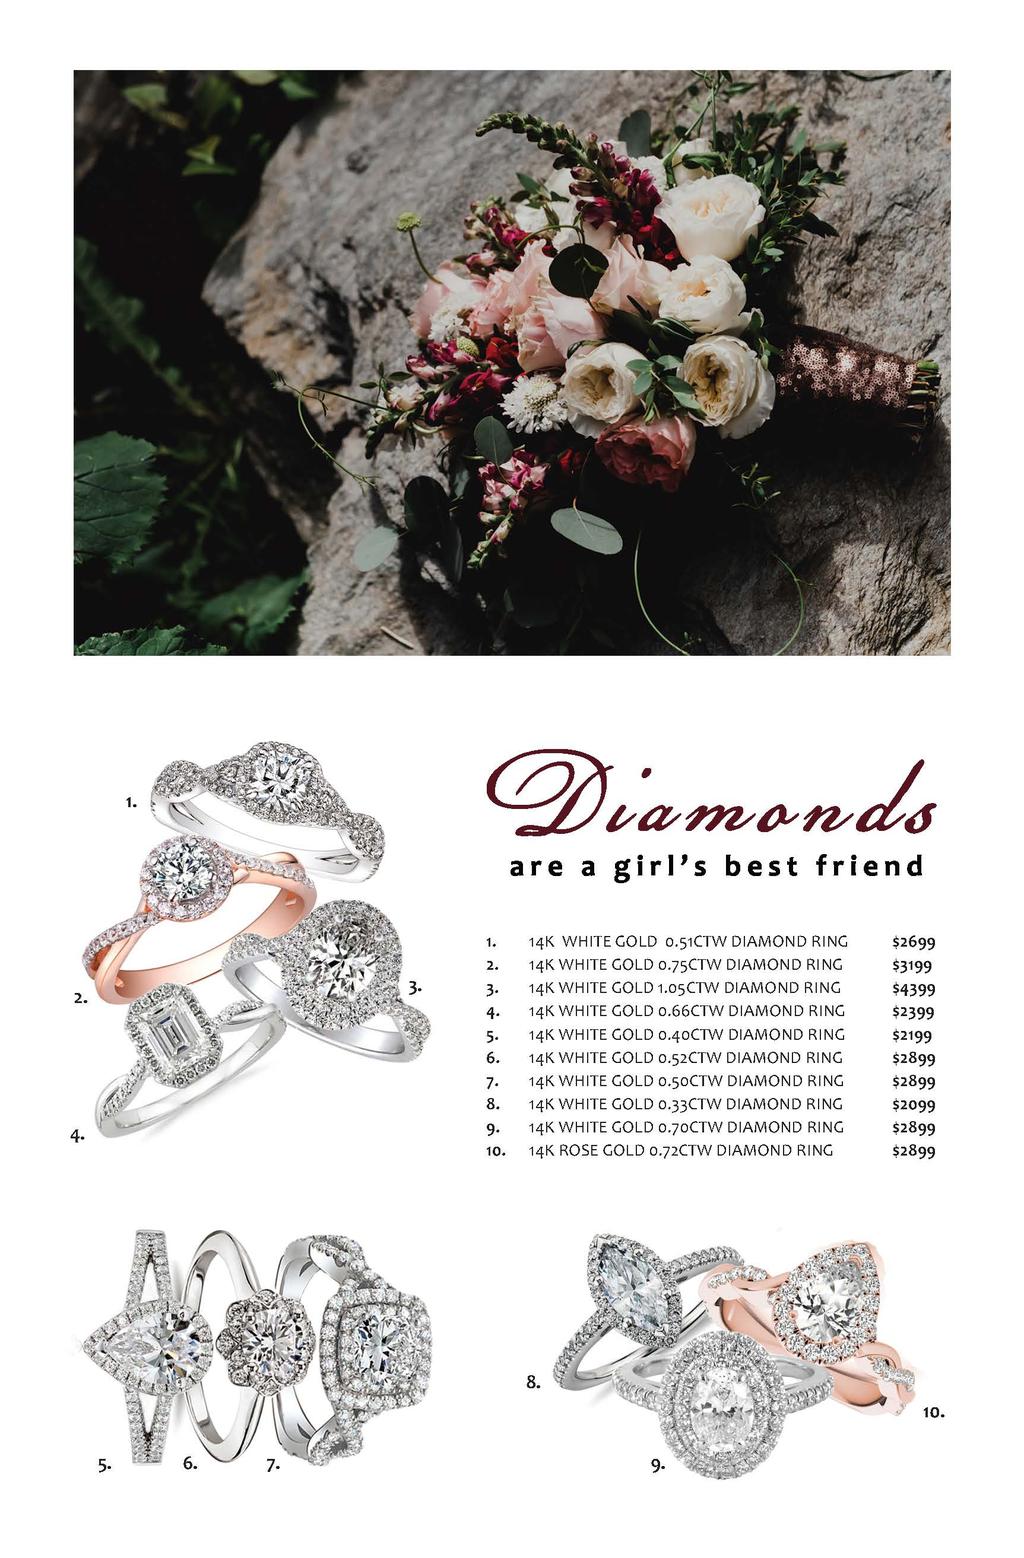 are a girl's best friend 1. 14K WHITE GOLD o.51ctw DIAMOND RING $2699 2. 14K WHITE GOLD o.75ctw DIAMOND RING $3199 3. 14K WHITE GOLD 1.05CTW DIAMOND RING $4399 4. 14K WHITE GOLD o.66ctw DIAMOND RING $2399 5.